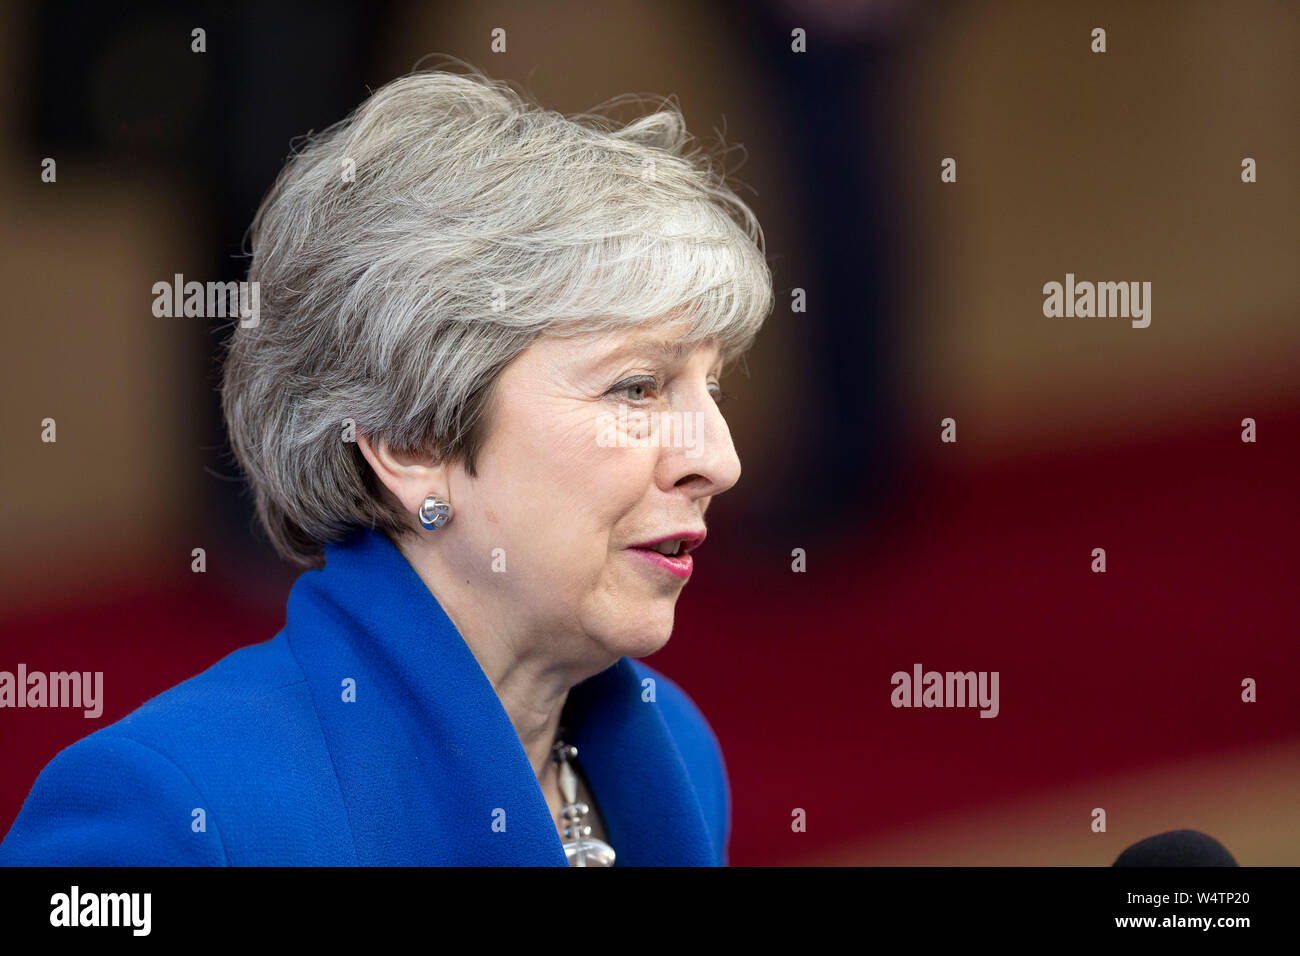 Belgium, Brussels, April 10th, 2019: European summit on Brexit, UK's leave from the European Union. British Prime Minister Theresa May arriving at the Stock Photo